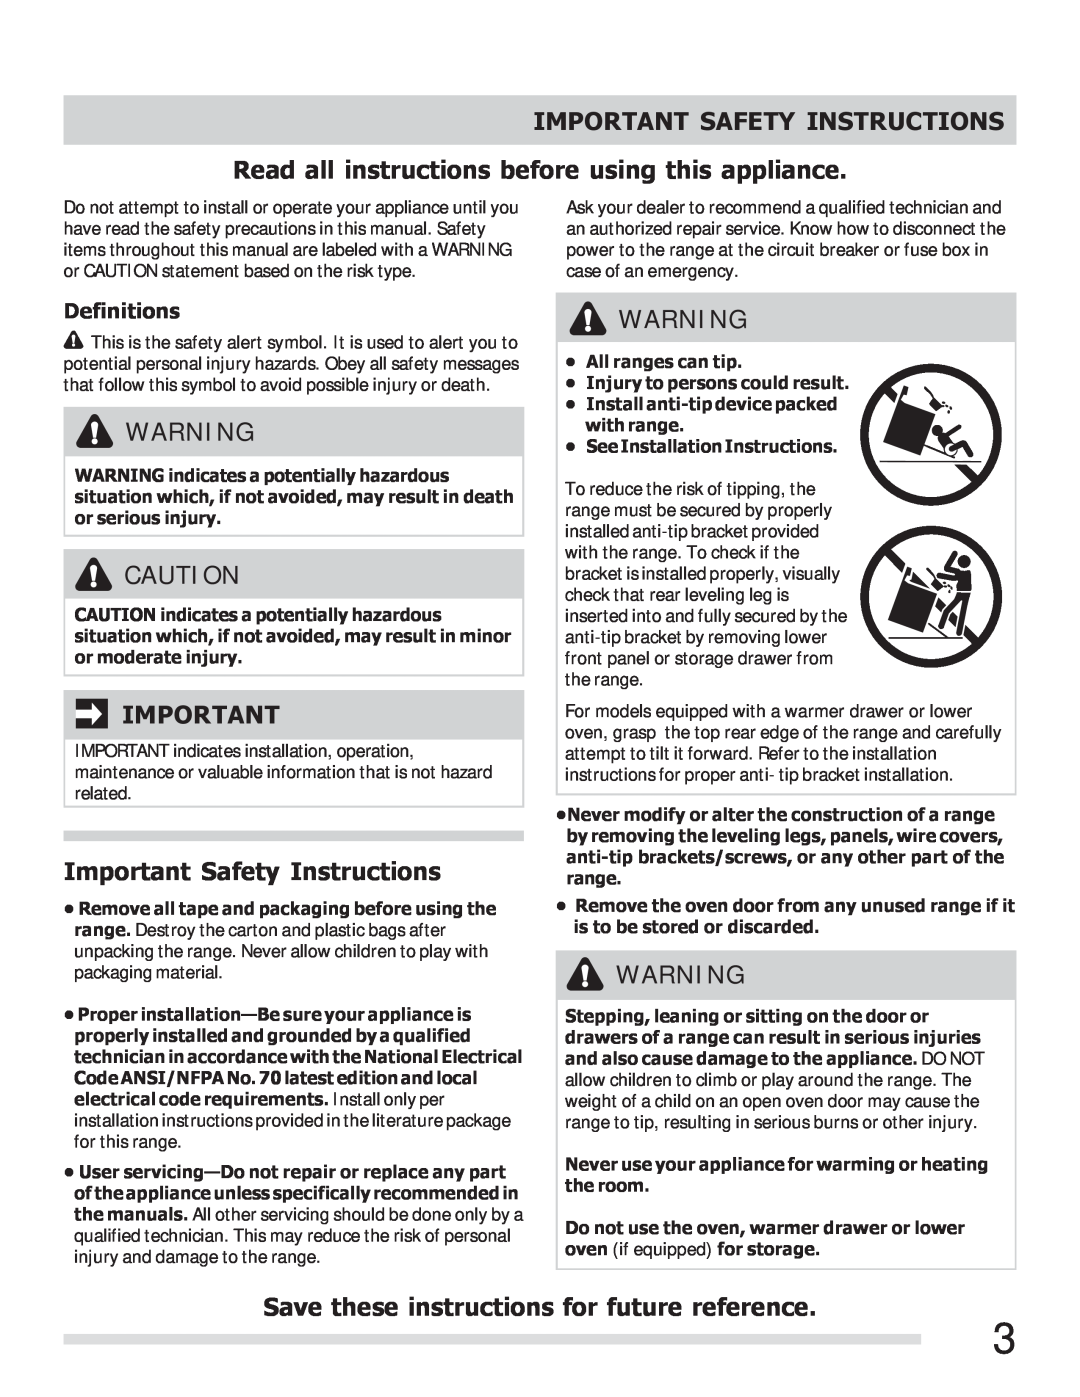 Frigidaire FFEF3011LW Important Safety Instructions, Read all instructions before using this appliance, Definitions 